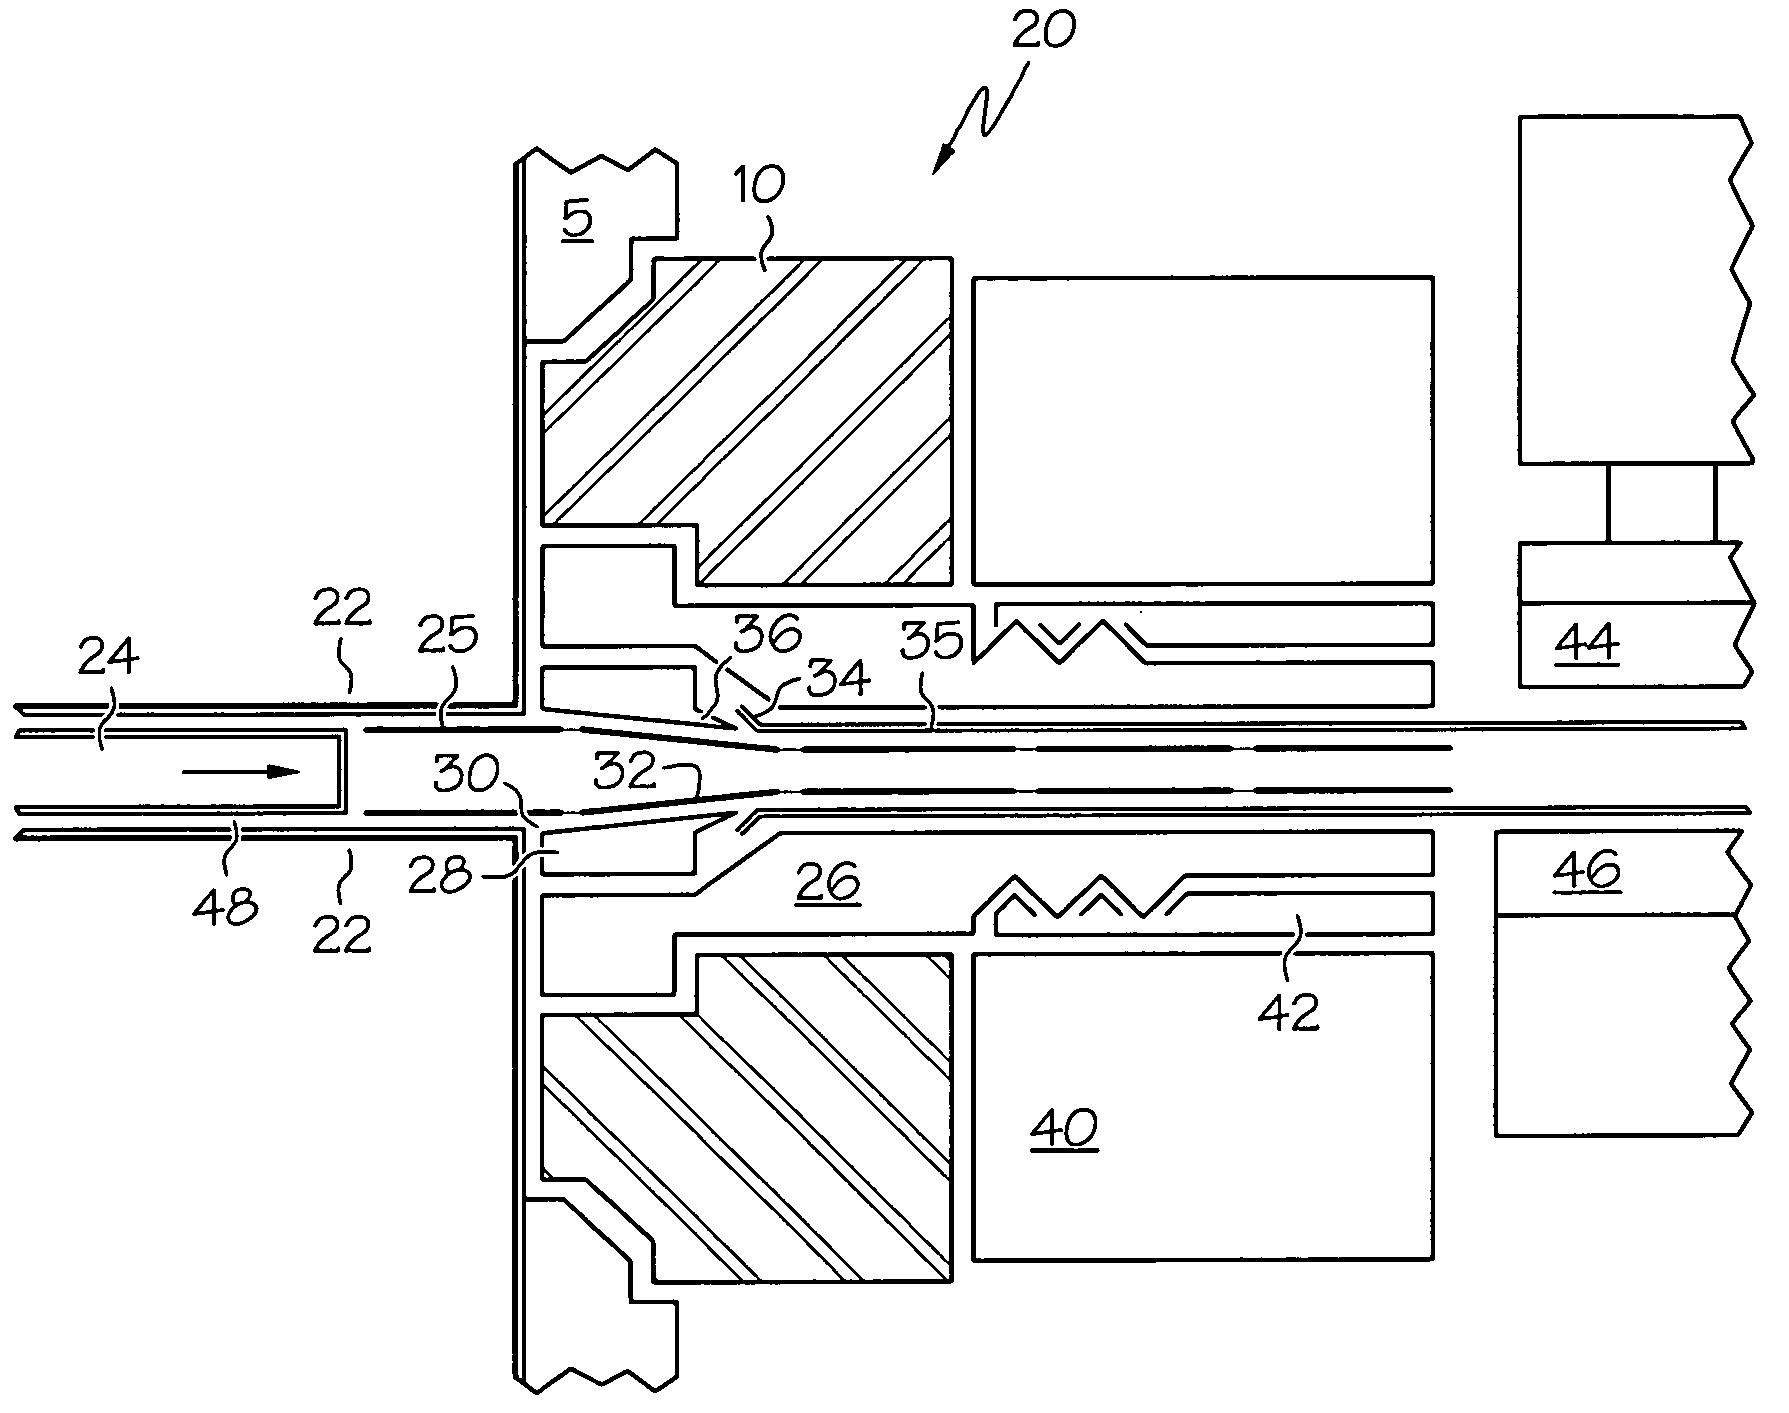 Apparatuses for crimping and loading of intraluminal medical devices